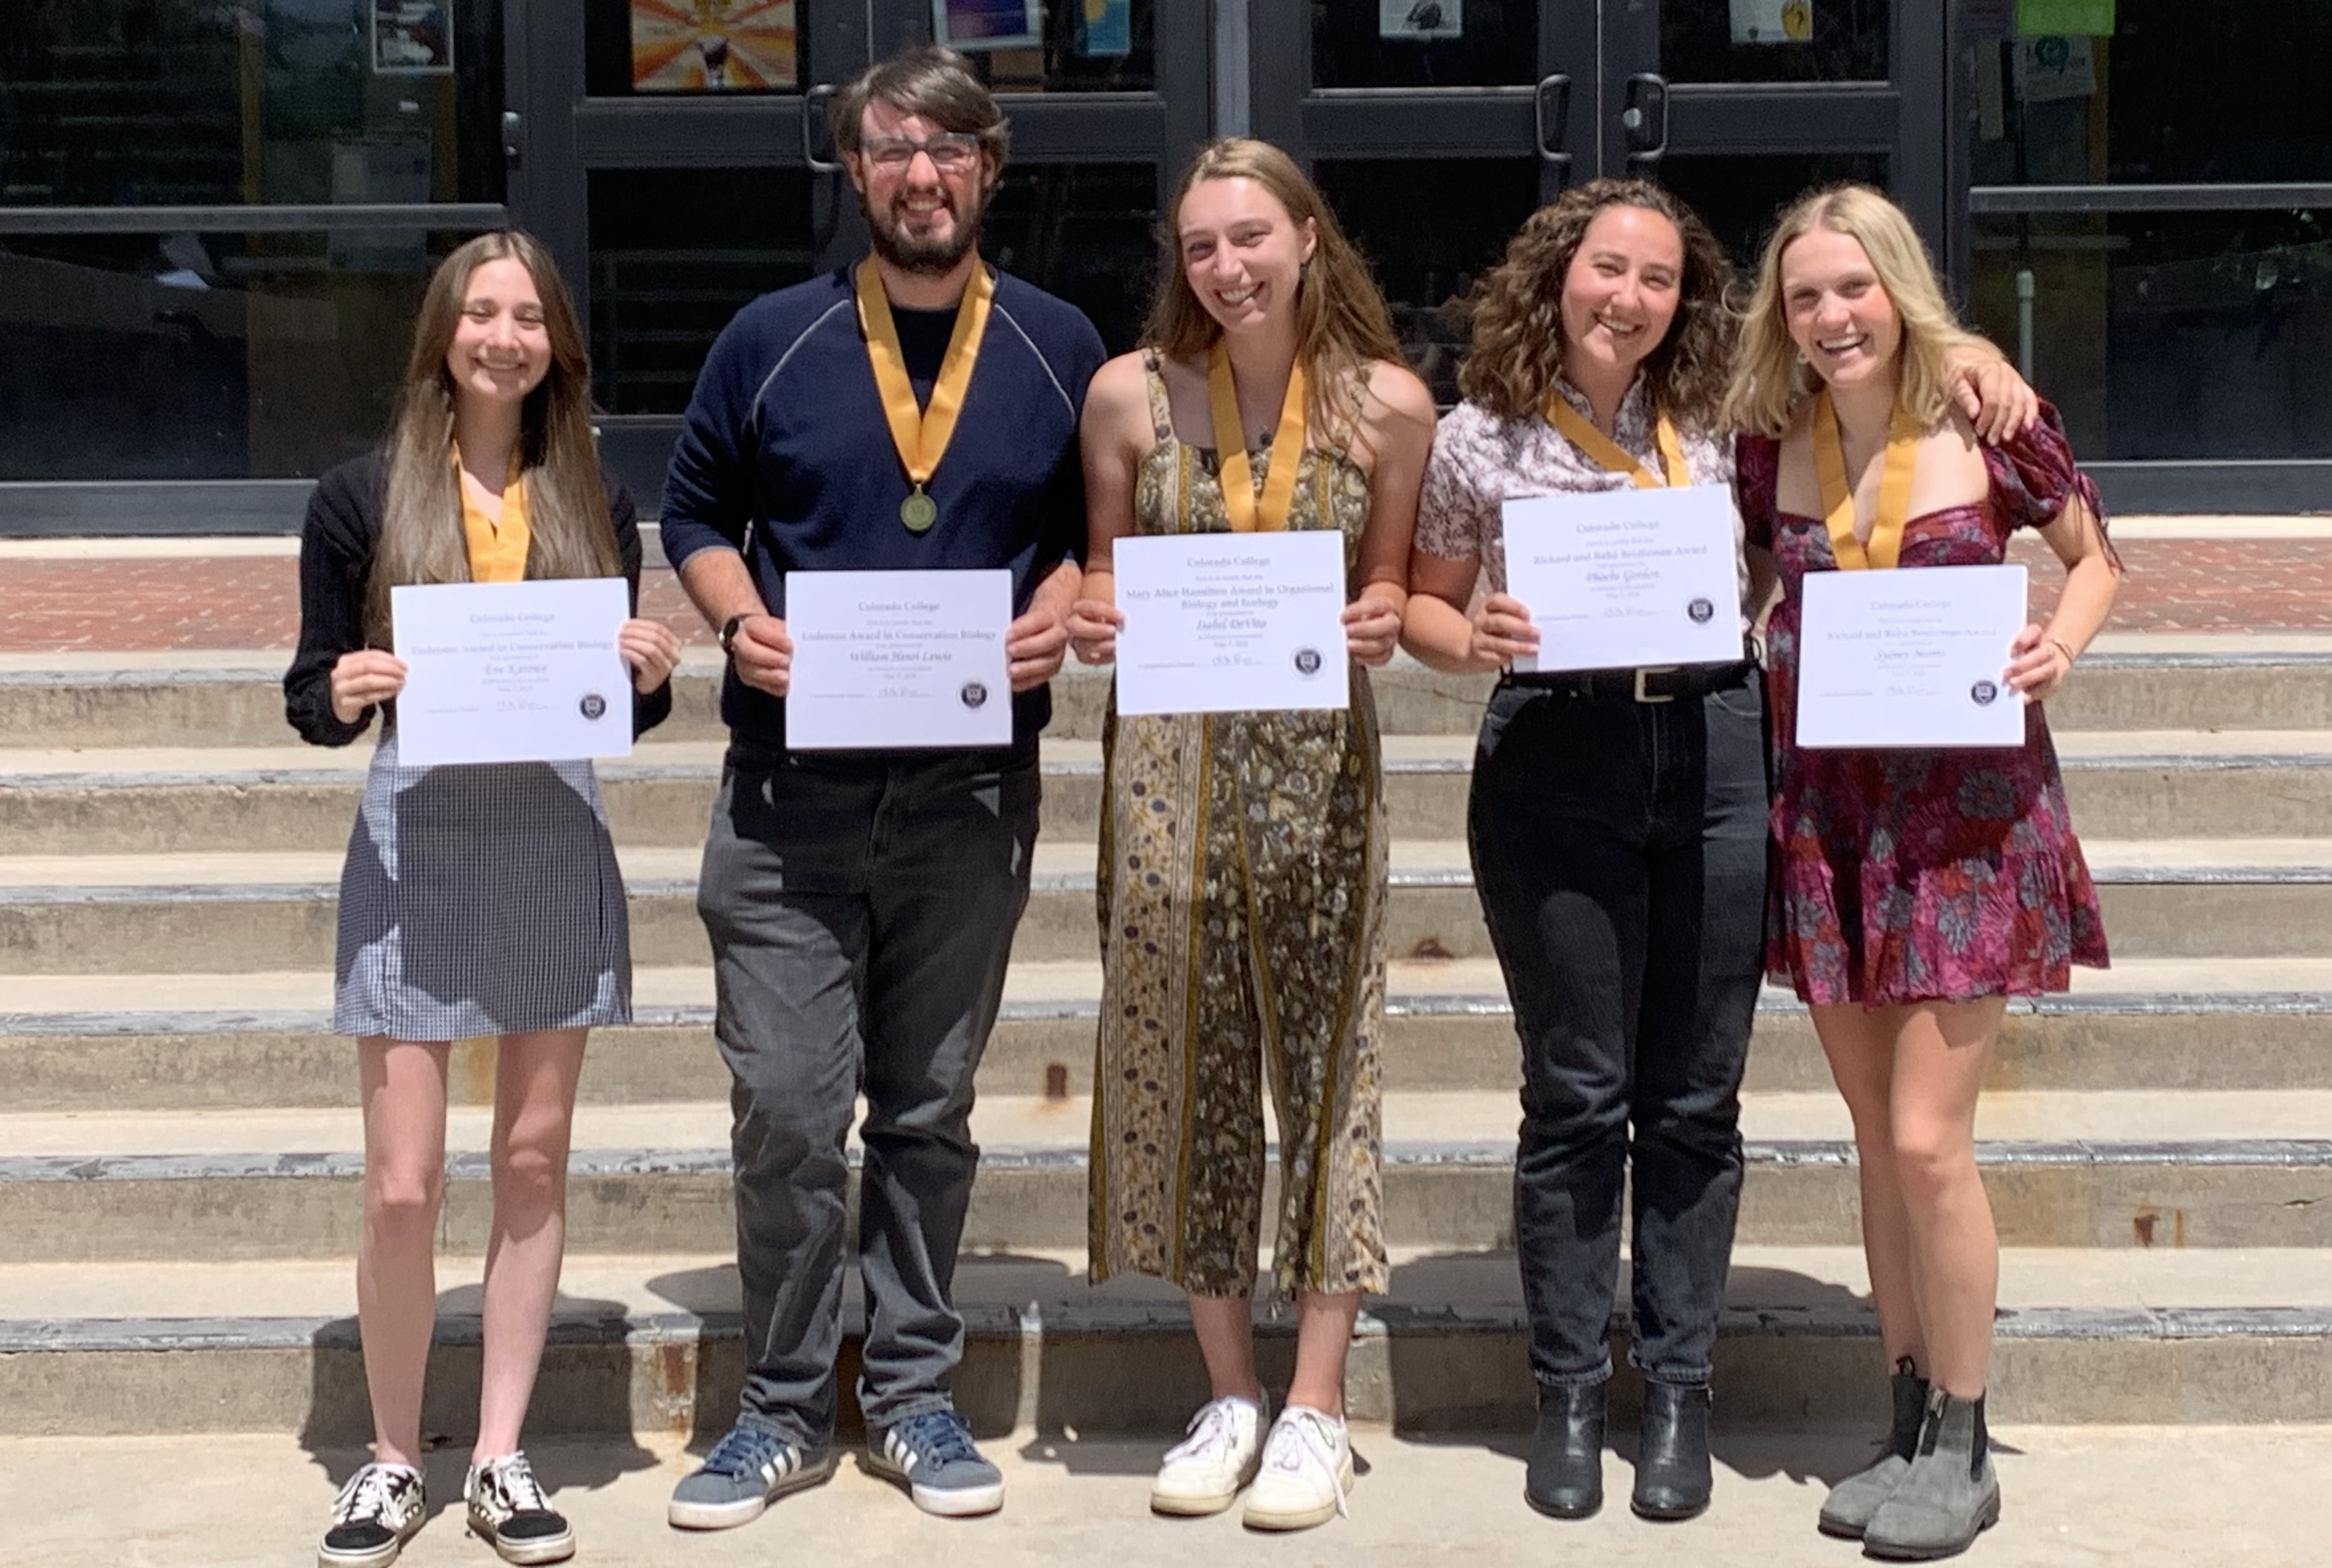 OBE seniors Eve Karowe, William Lewis, Isabel Devito, Phoebe Gordon and Sydney Morris (left to right) received departmental awards at the 2024 Honors convocation, congratulations!